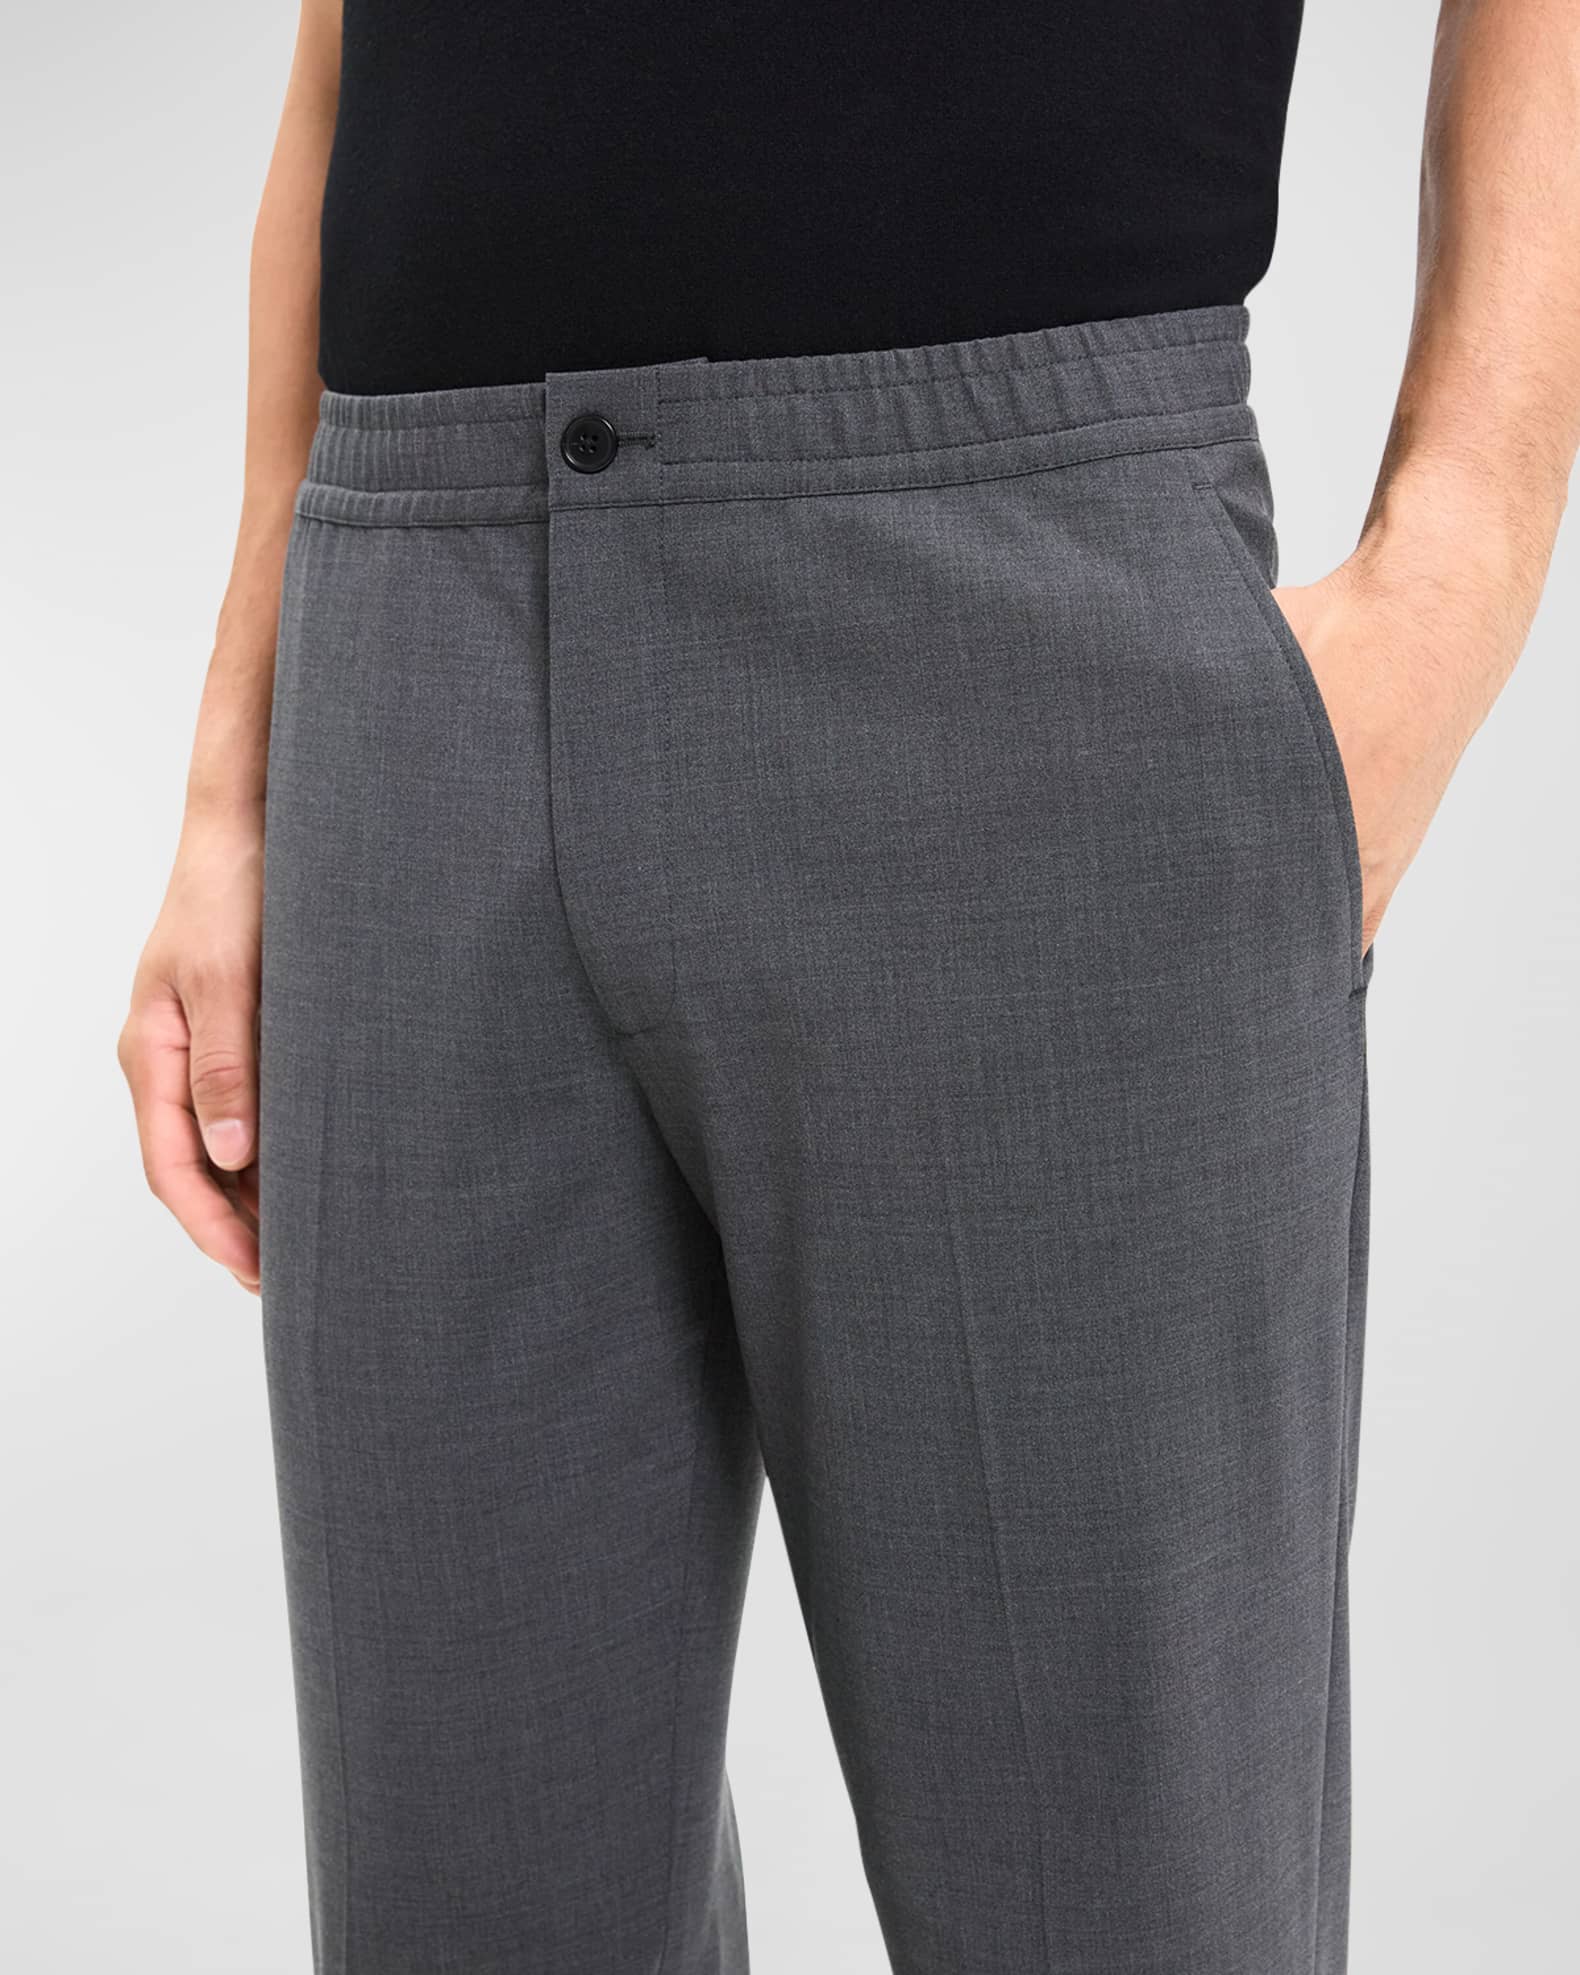 Theory Men's Mayer Stretch Wool Pants | Neiman Marcus